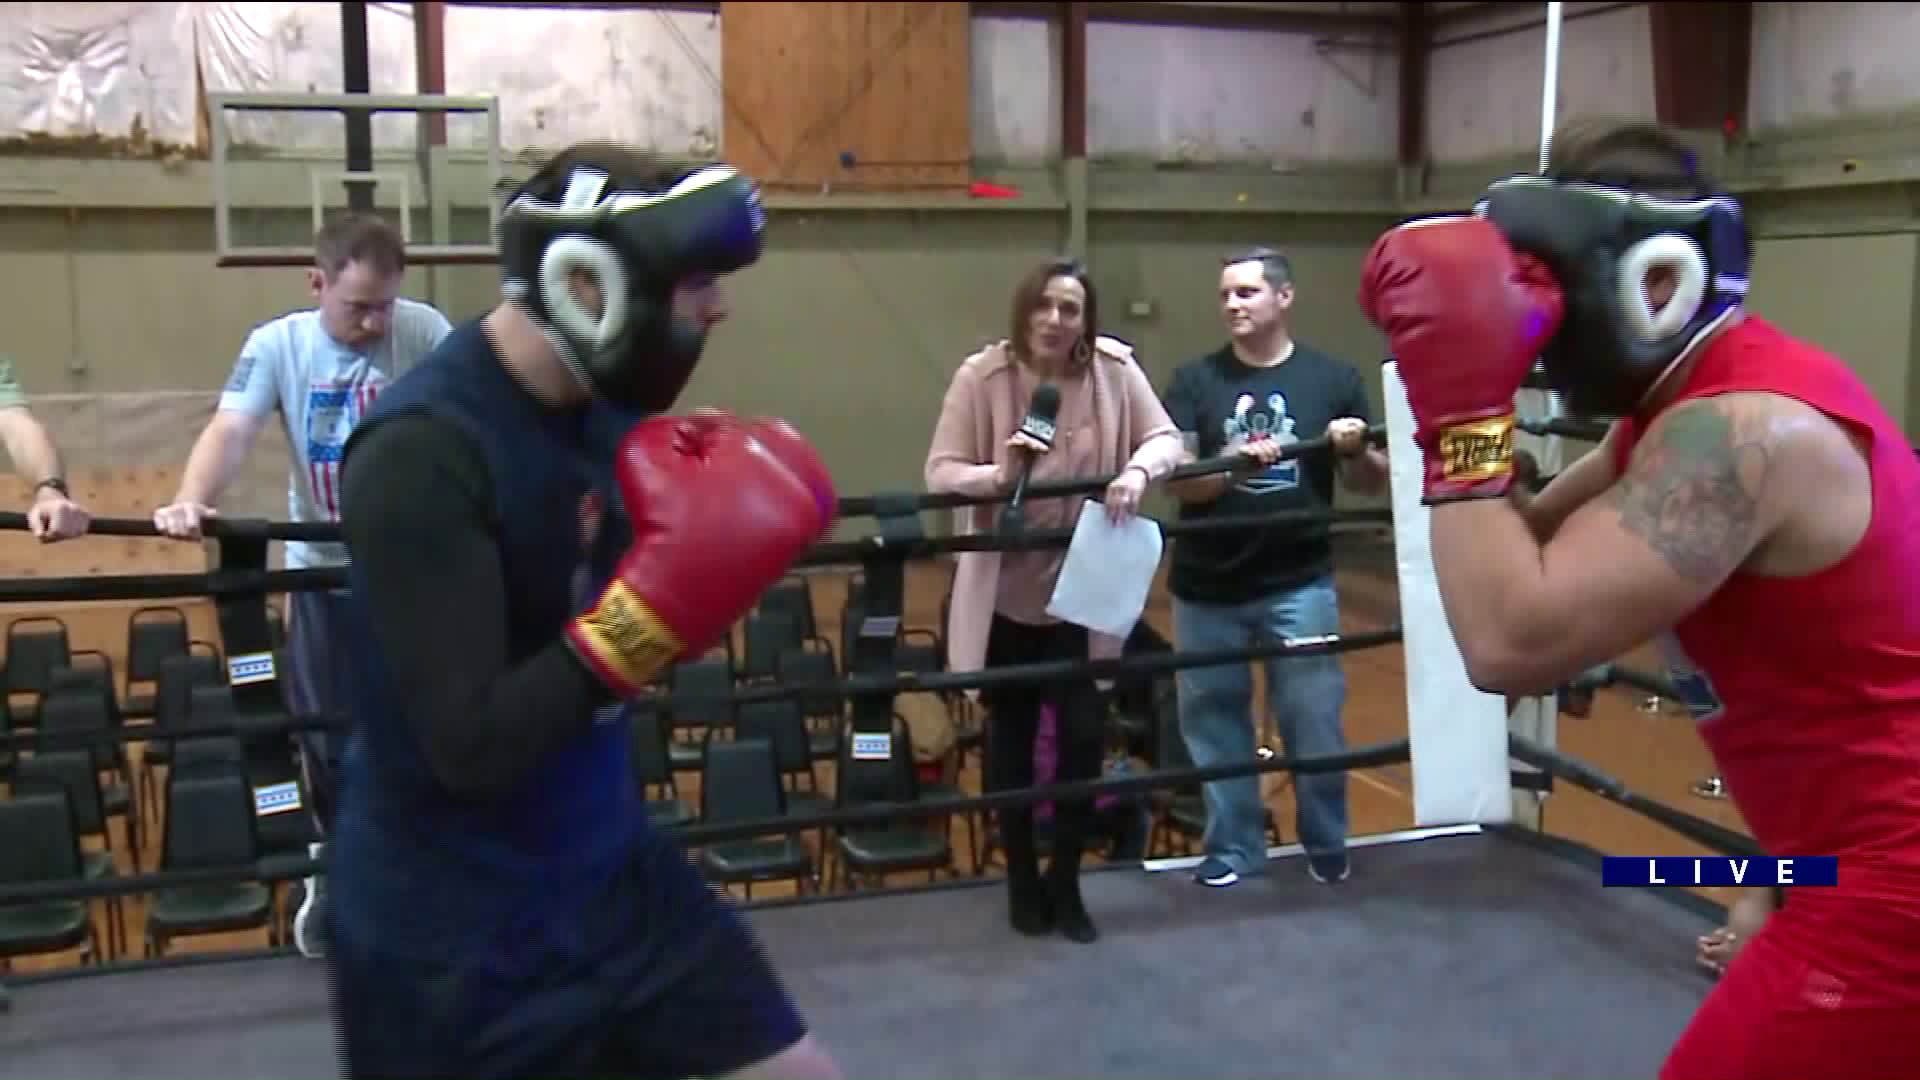 Around Town cheers on Police Officers and Firefighters as they face off in a boxing match